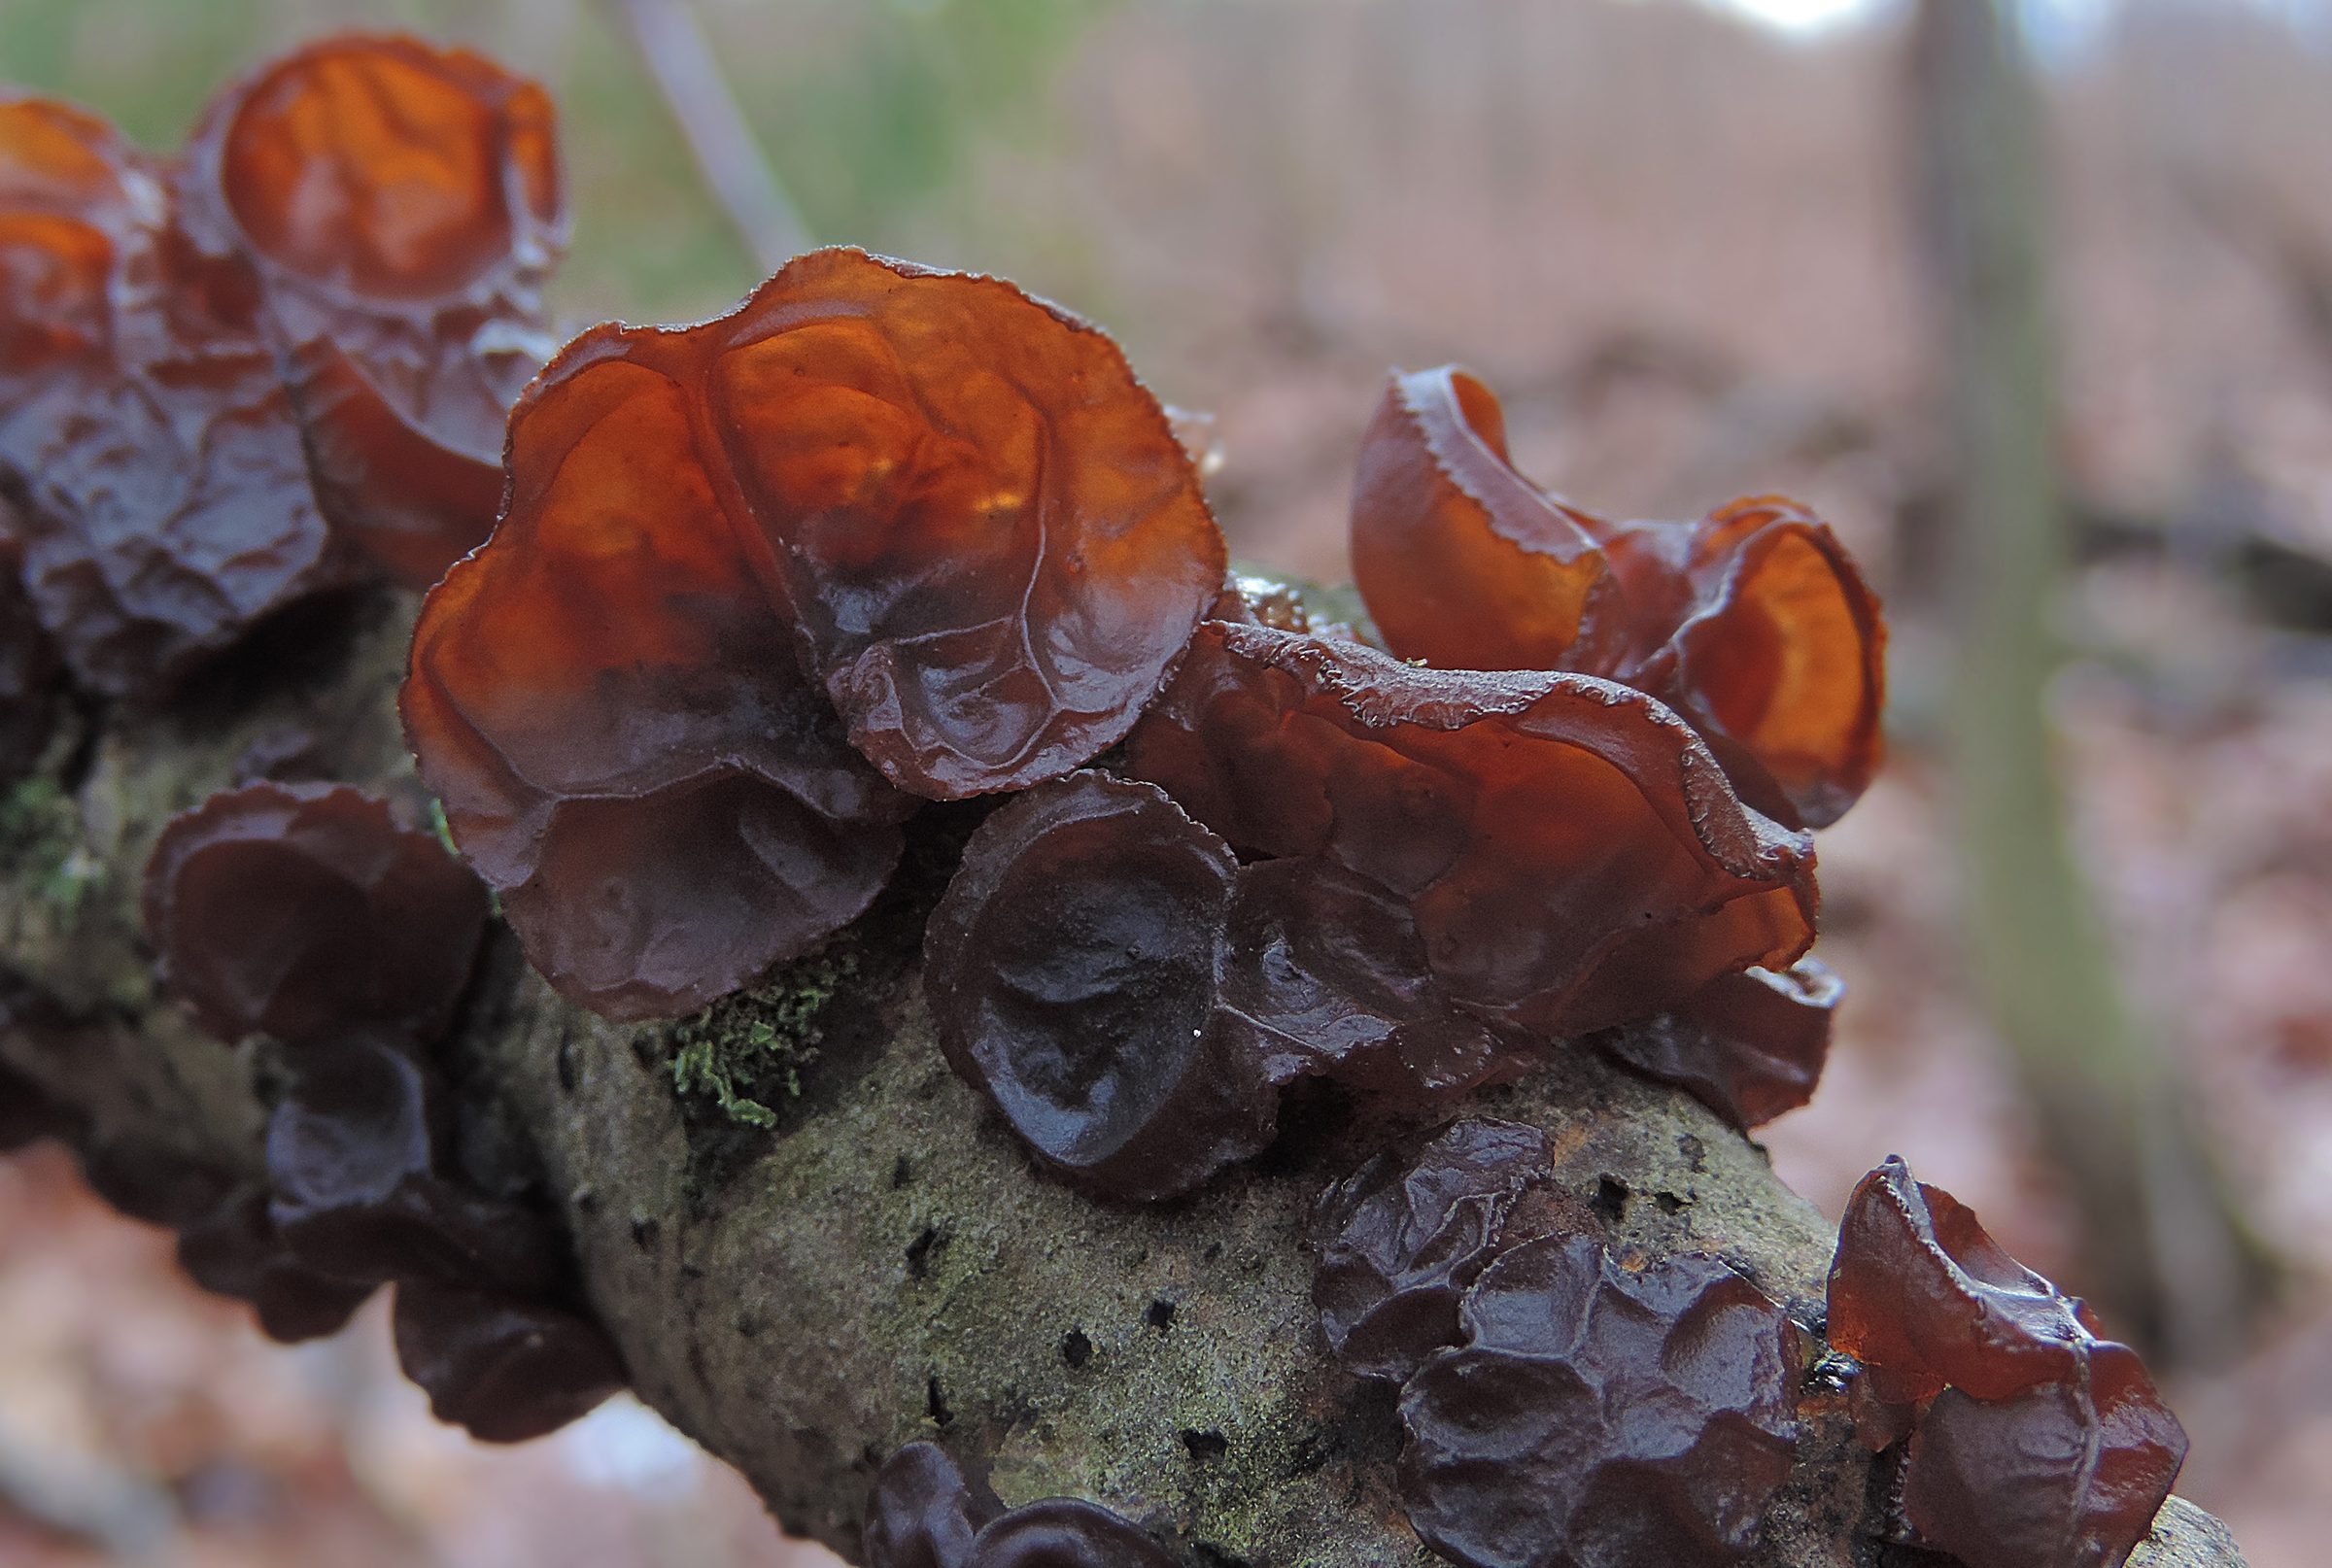 About Cloud Ear Fungus